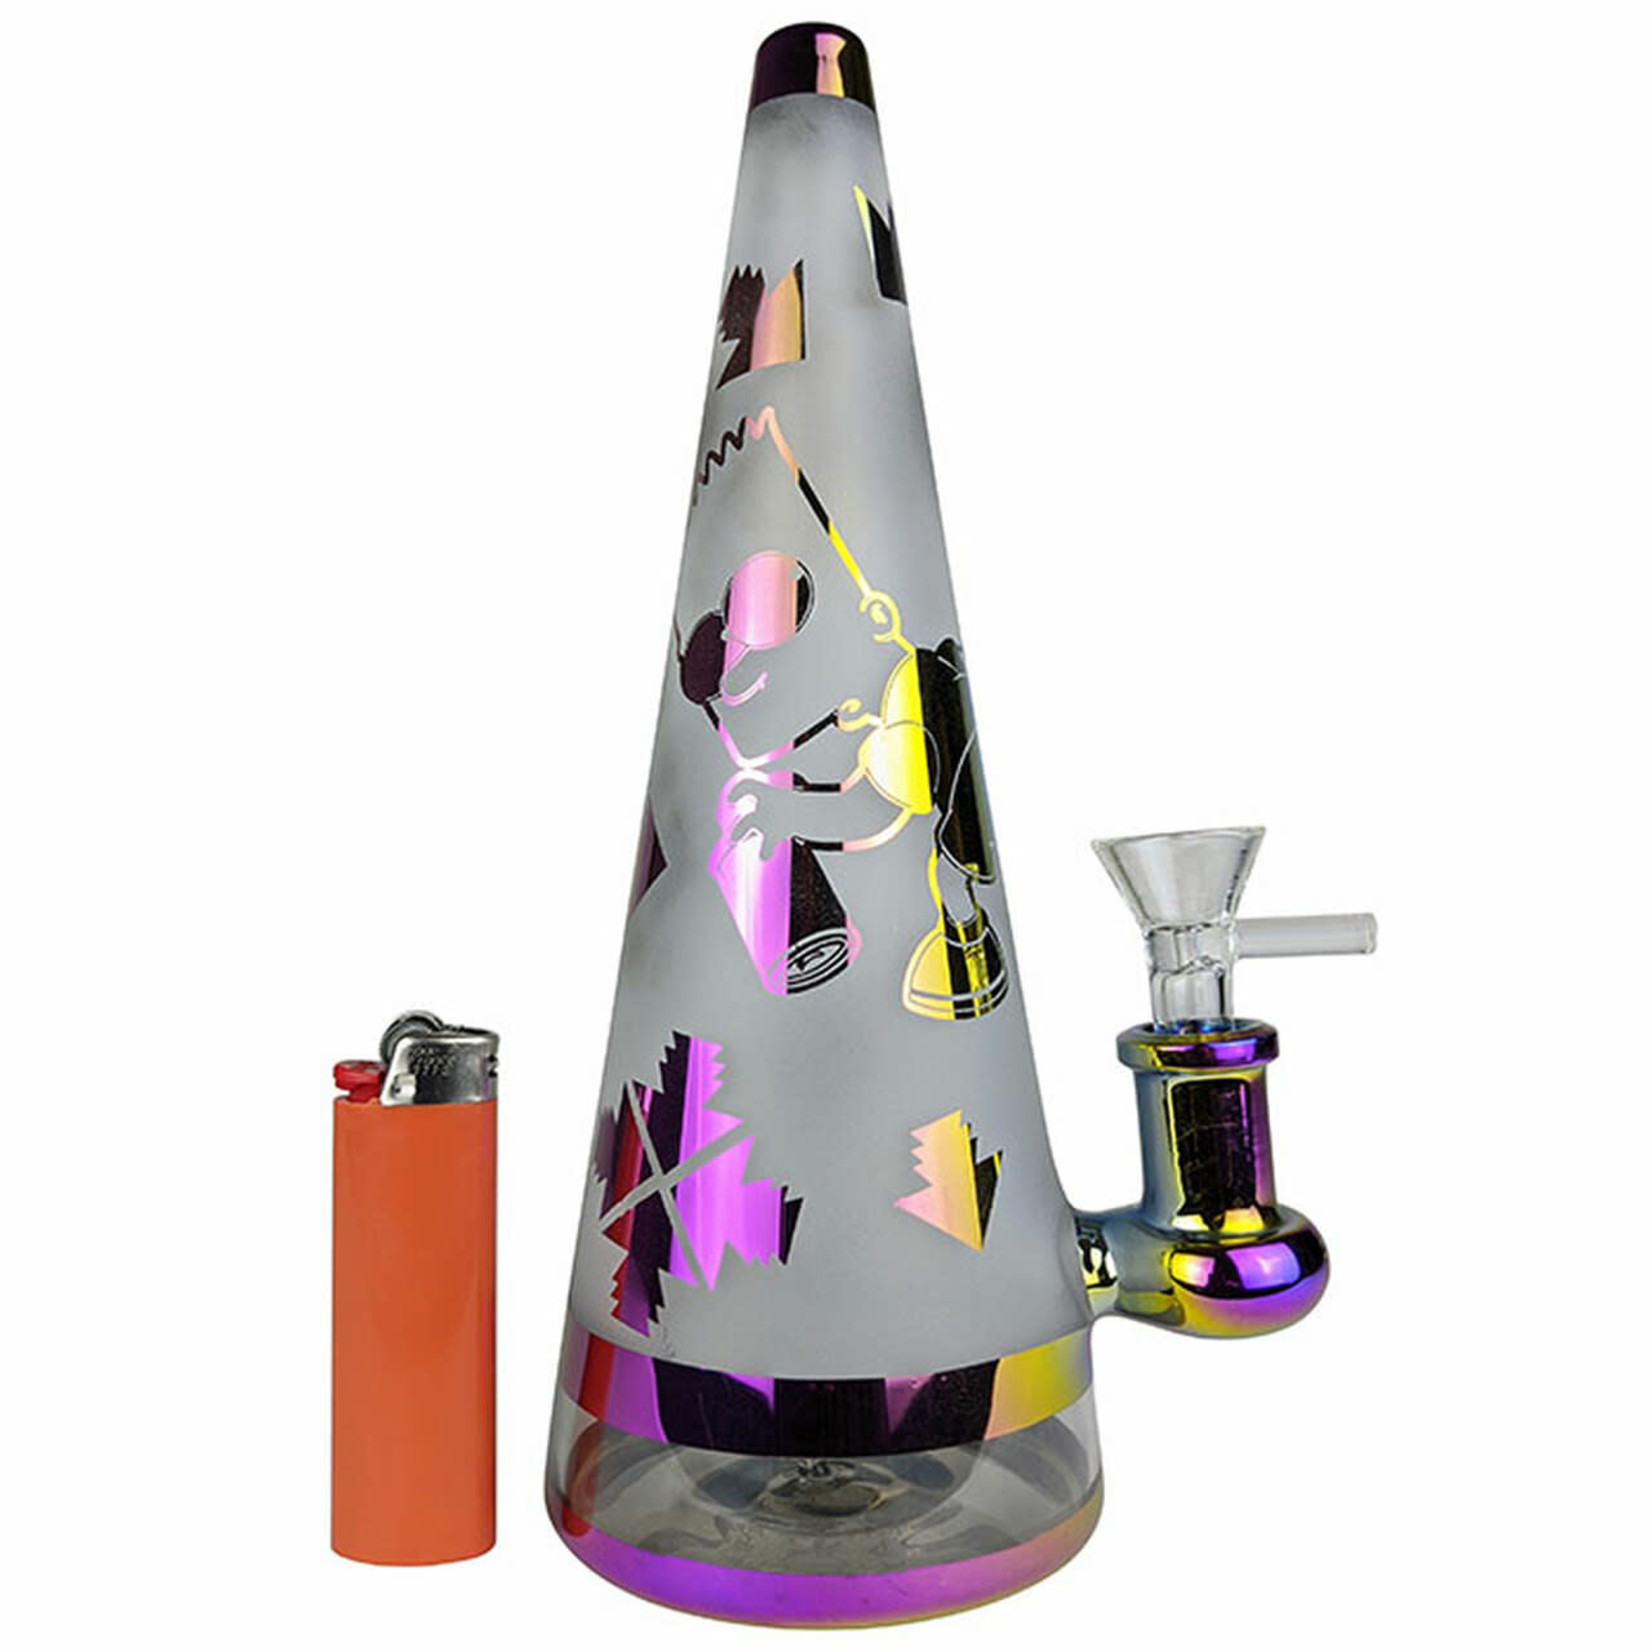 10” Sand Blasted Cartoon Games Decal Cone WP